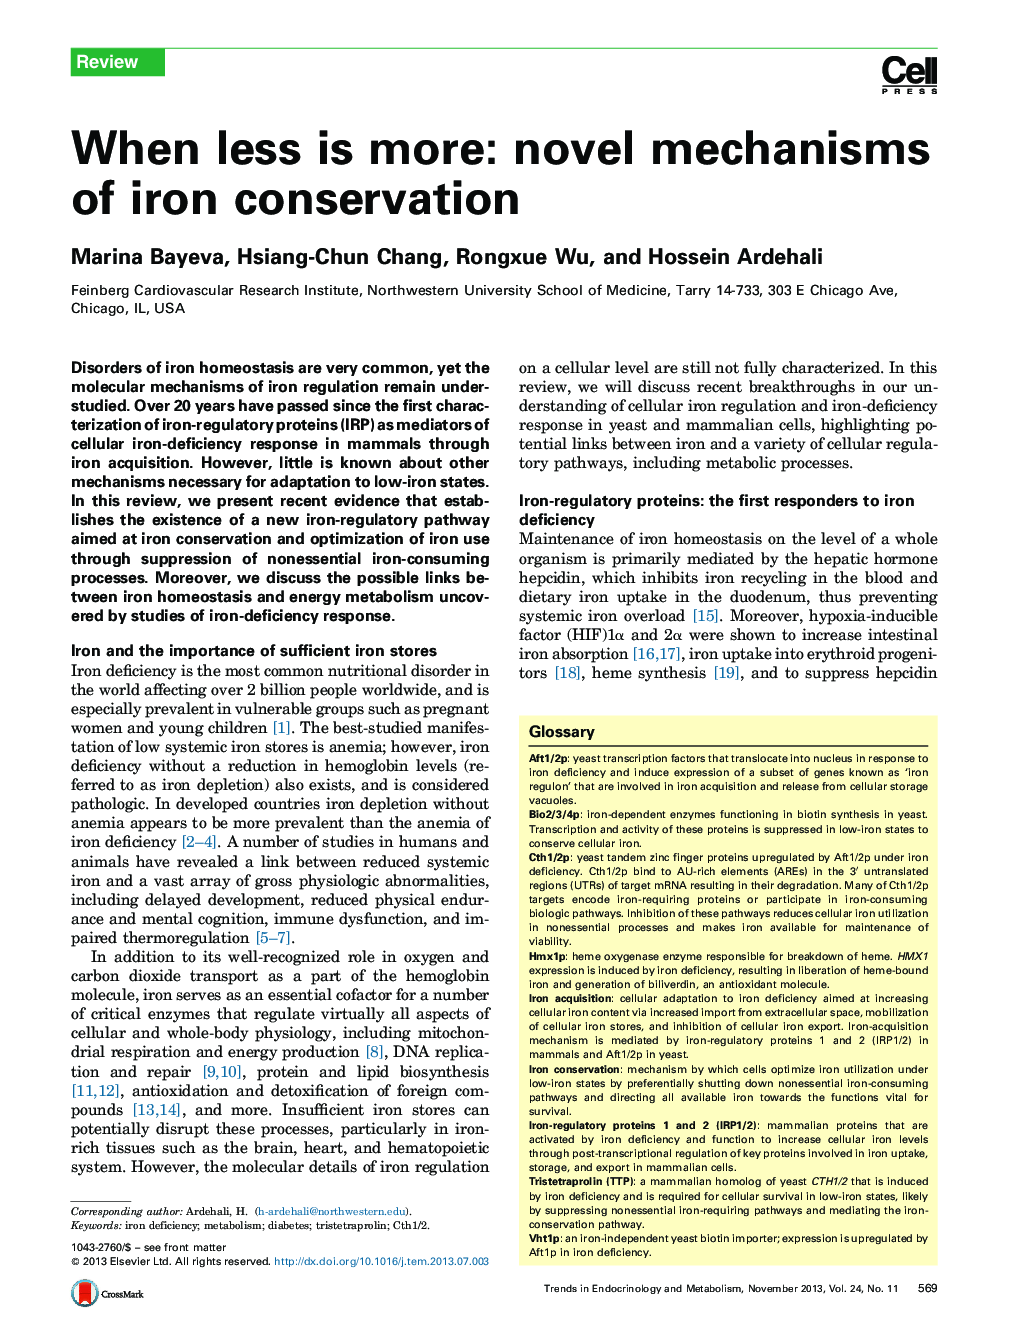 When less is more: novel mechanisms of iron conservation